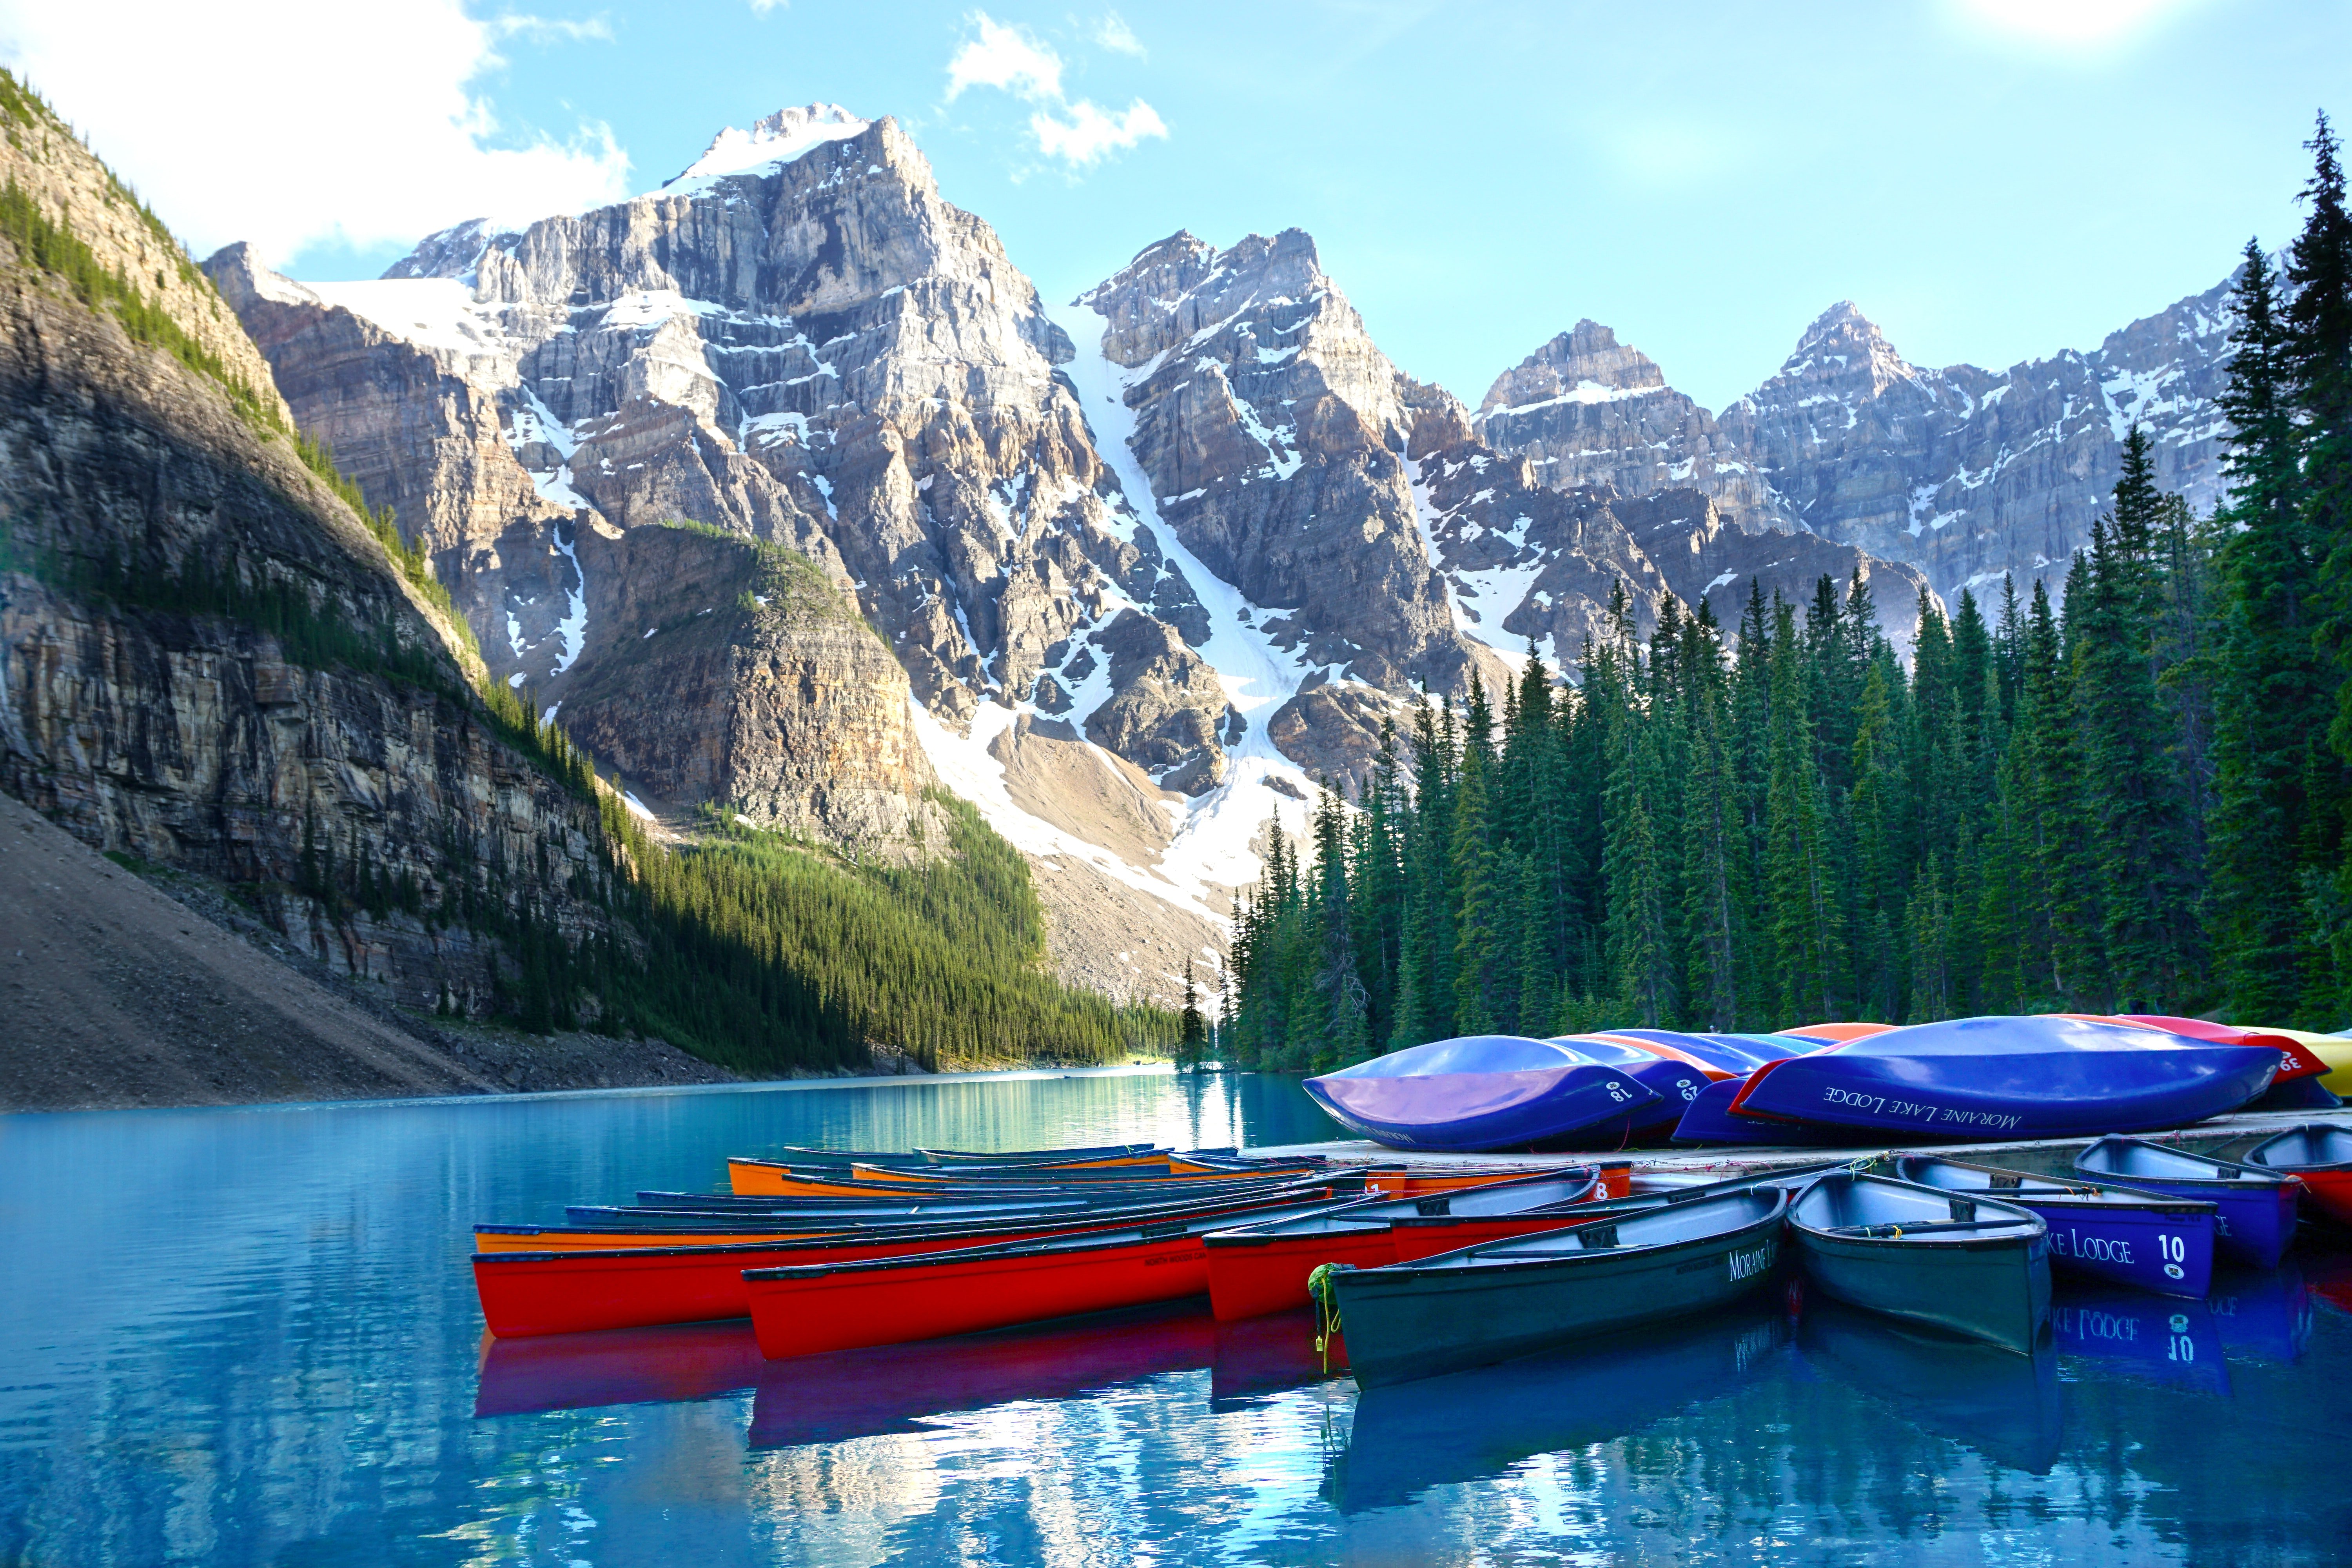 Canoes on blue waters with mountains and trees in the background